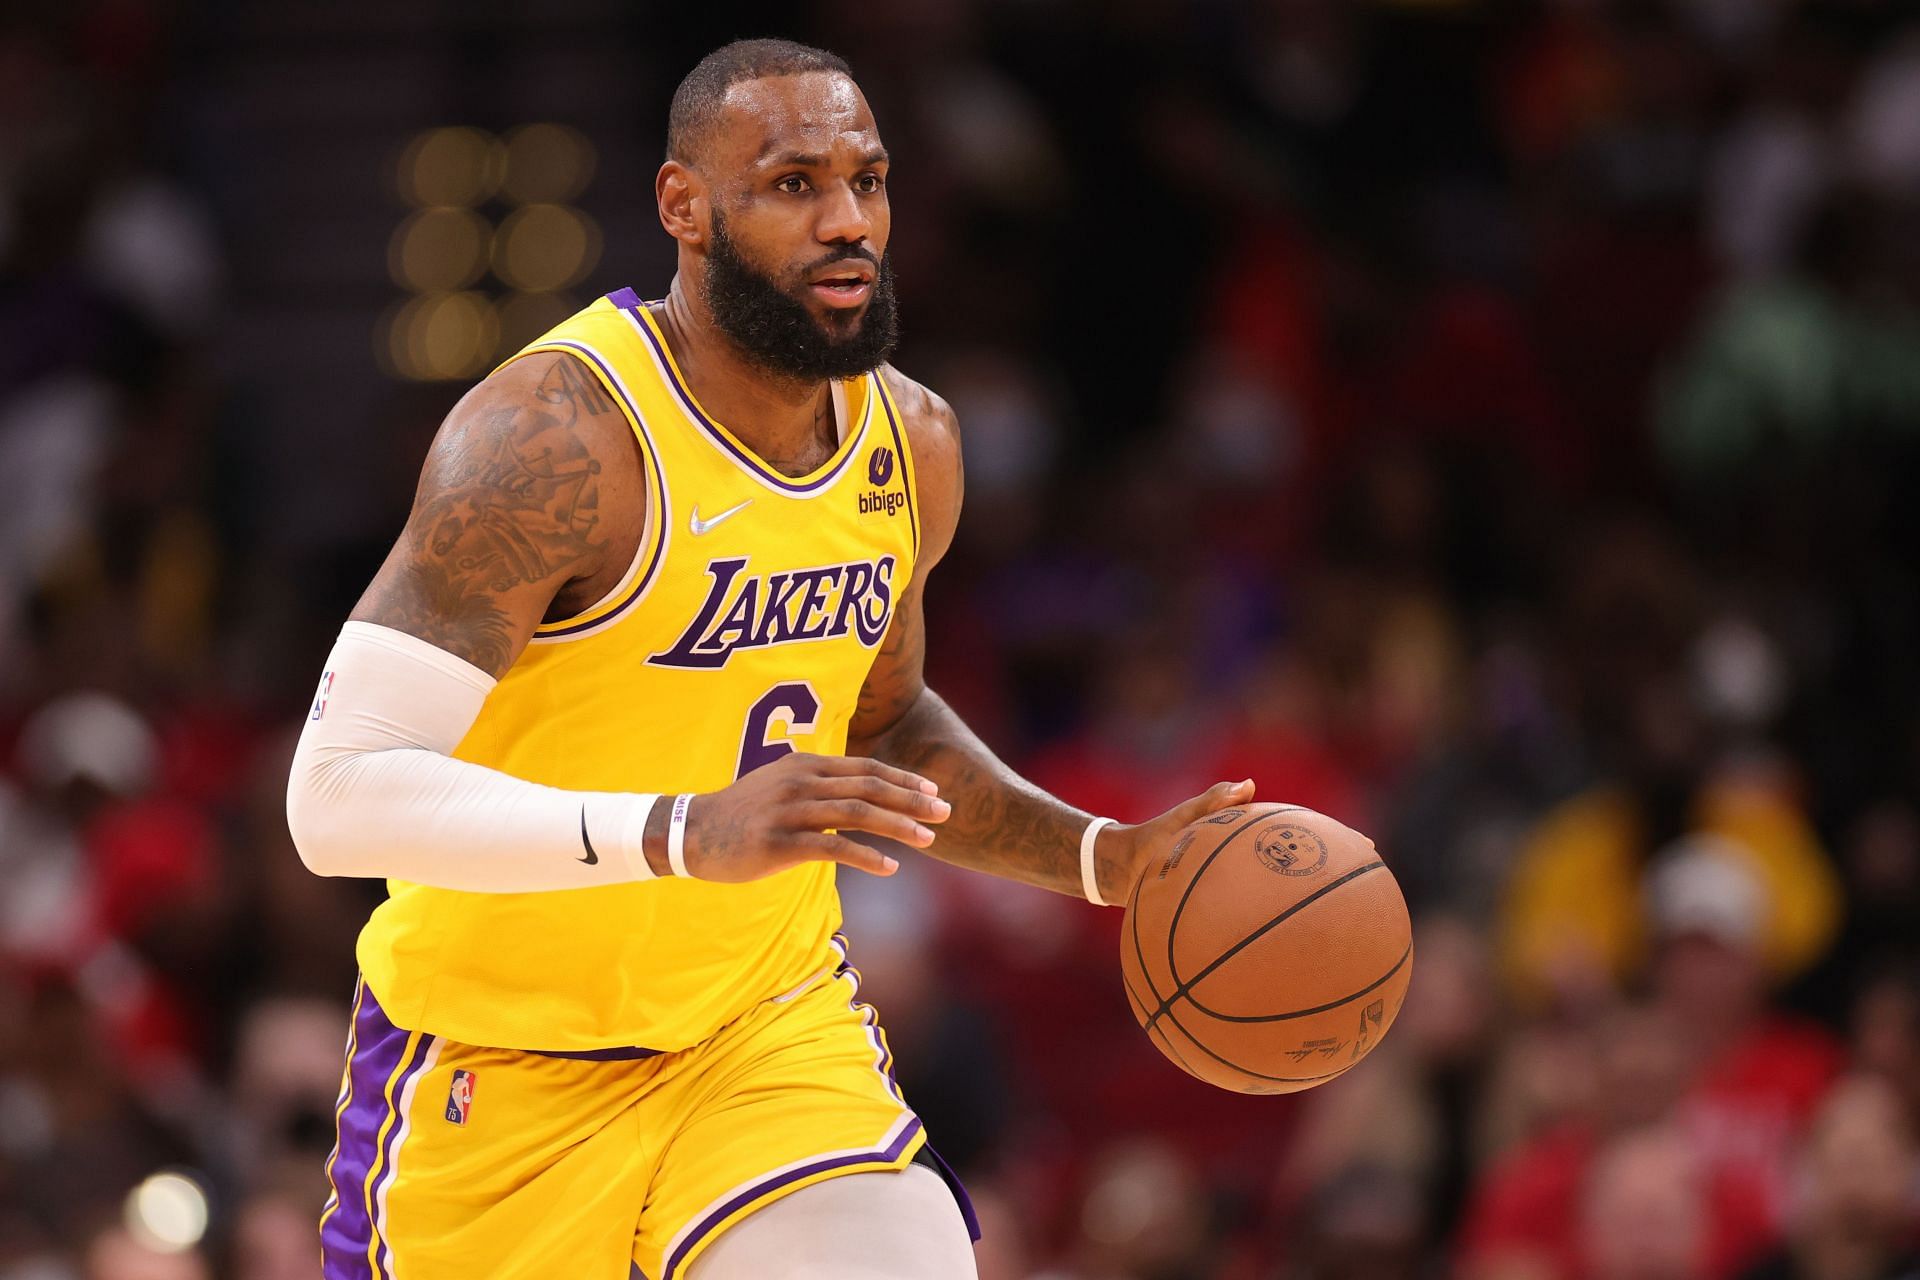 LeBron James of the LA Lakers against the Houston Rockets